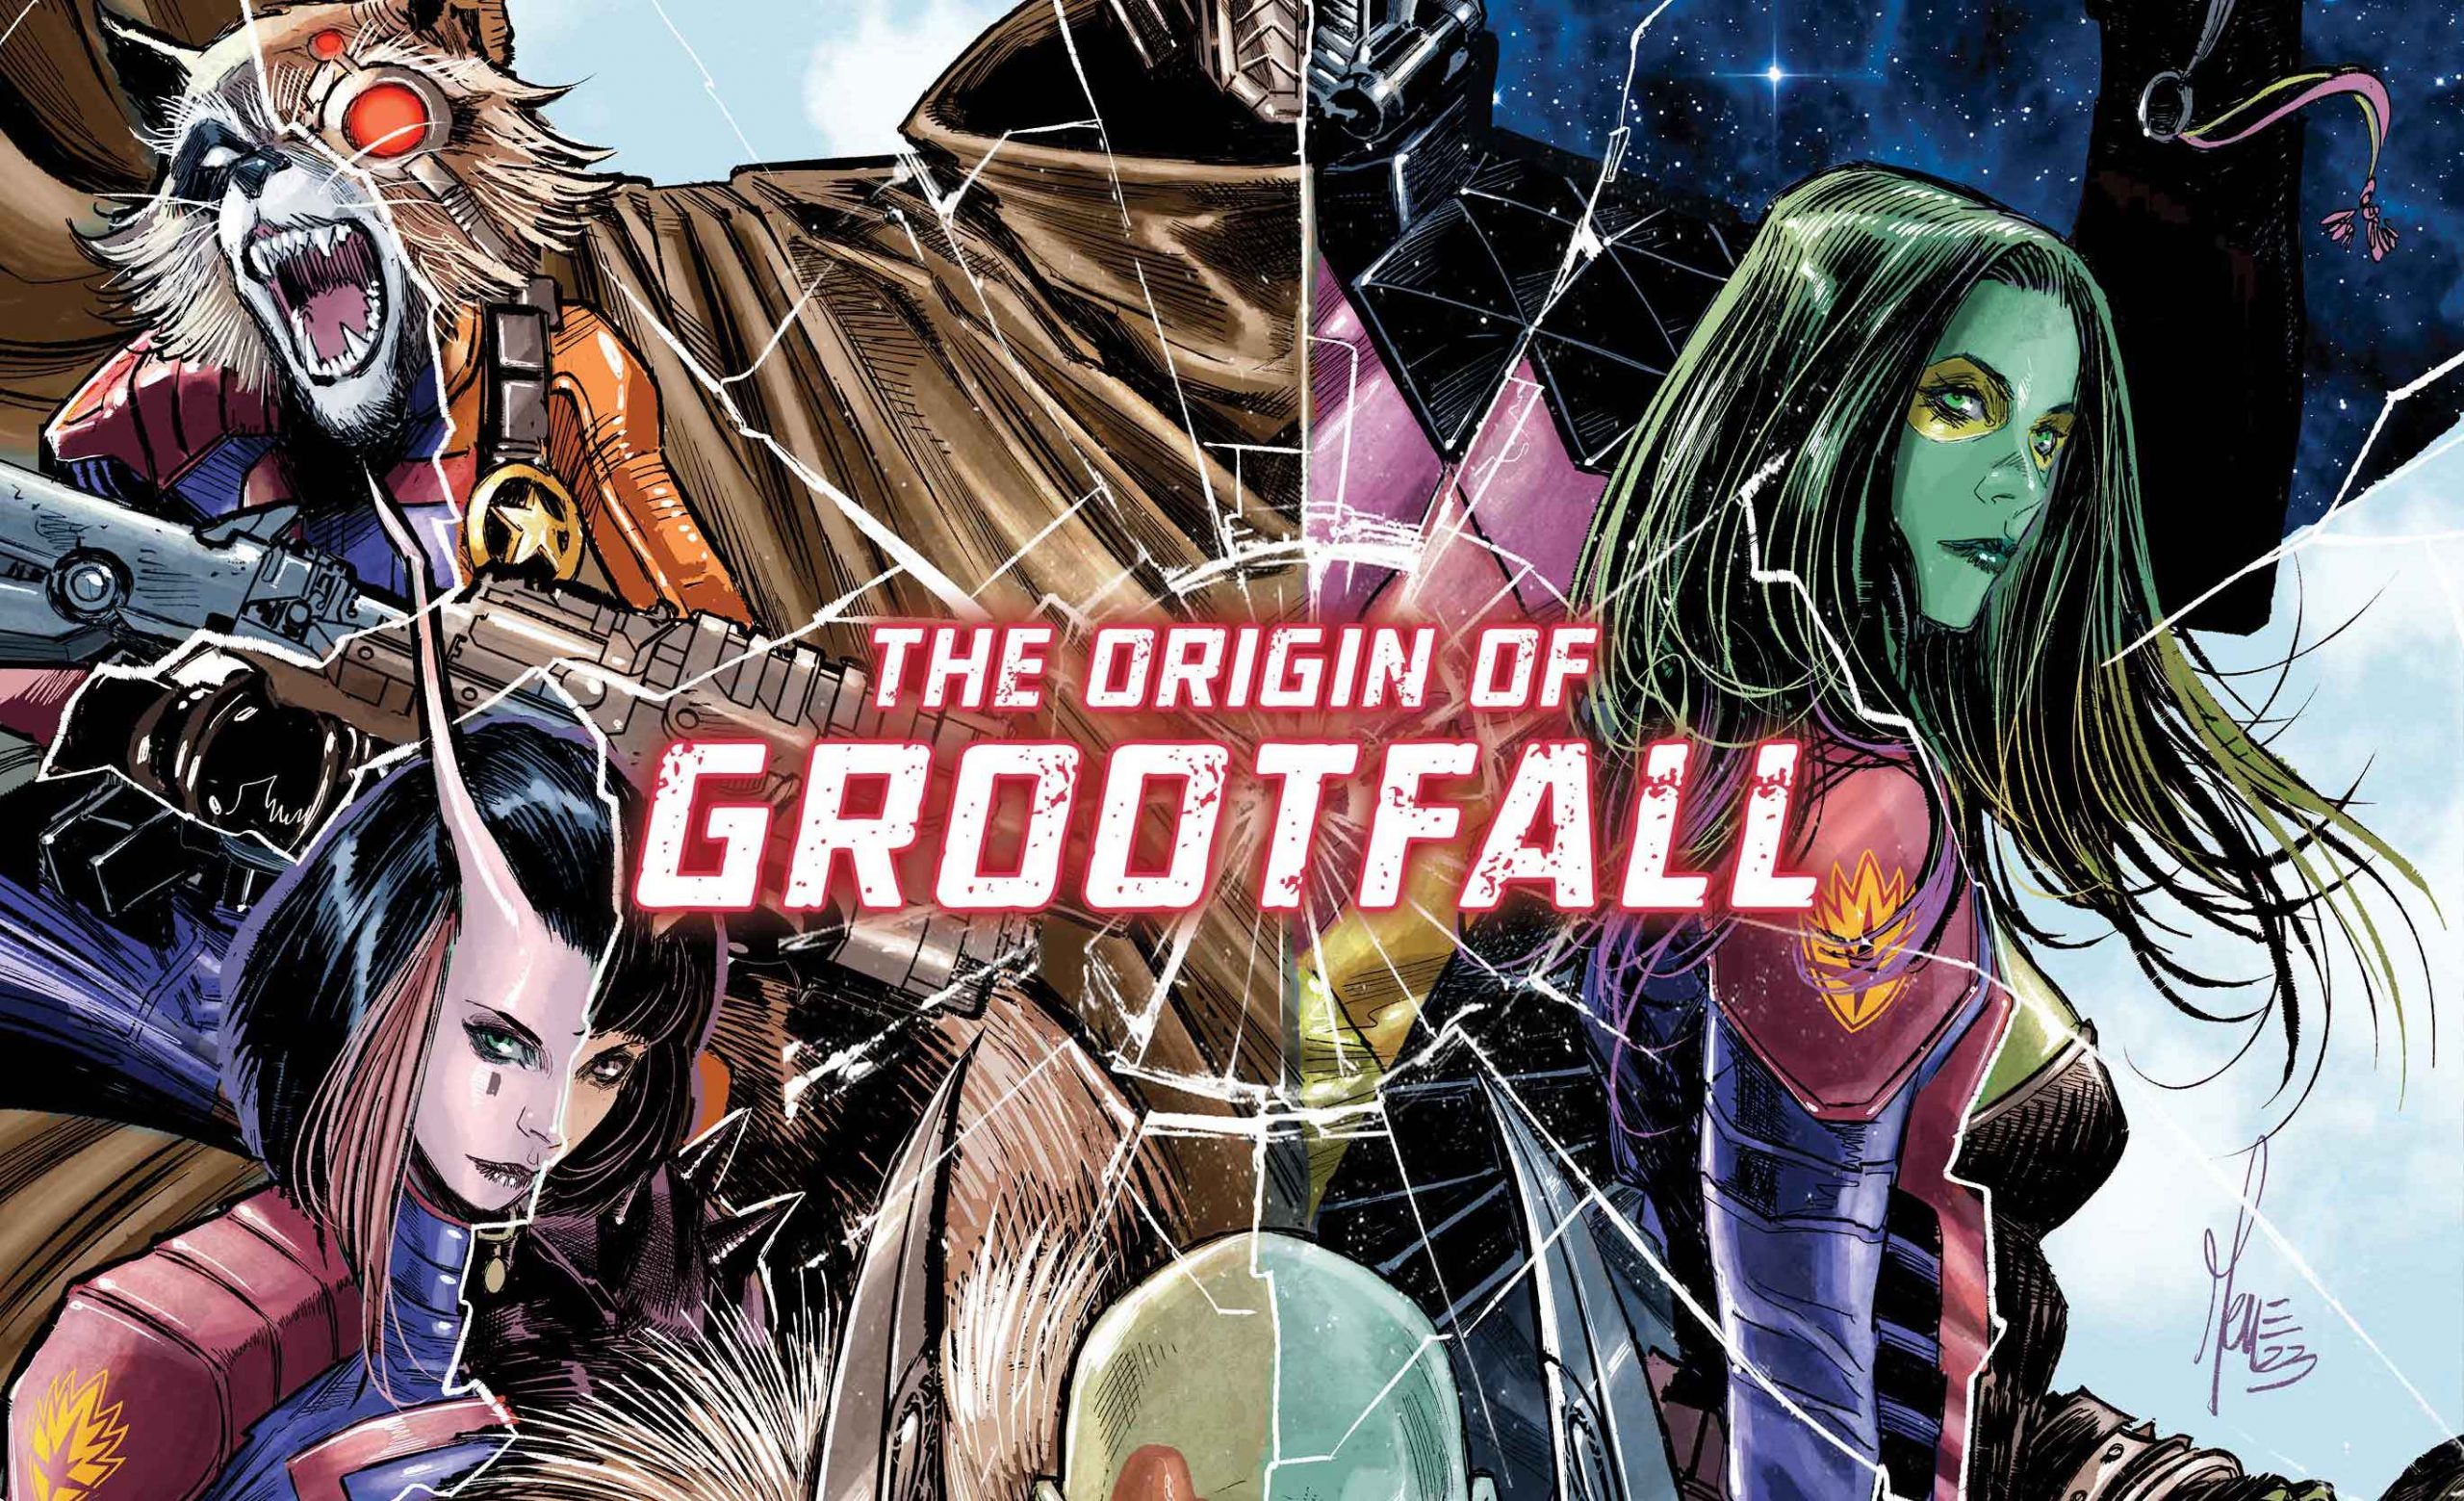 'Guardians of the Galaxy' #6 will reveal the Origin of Grootfall